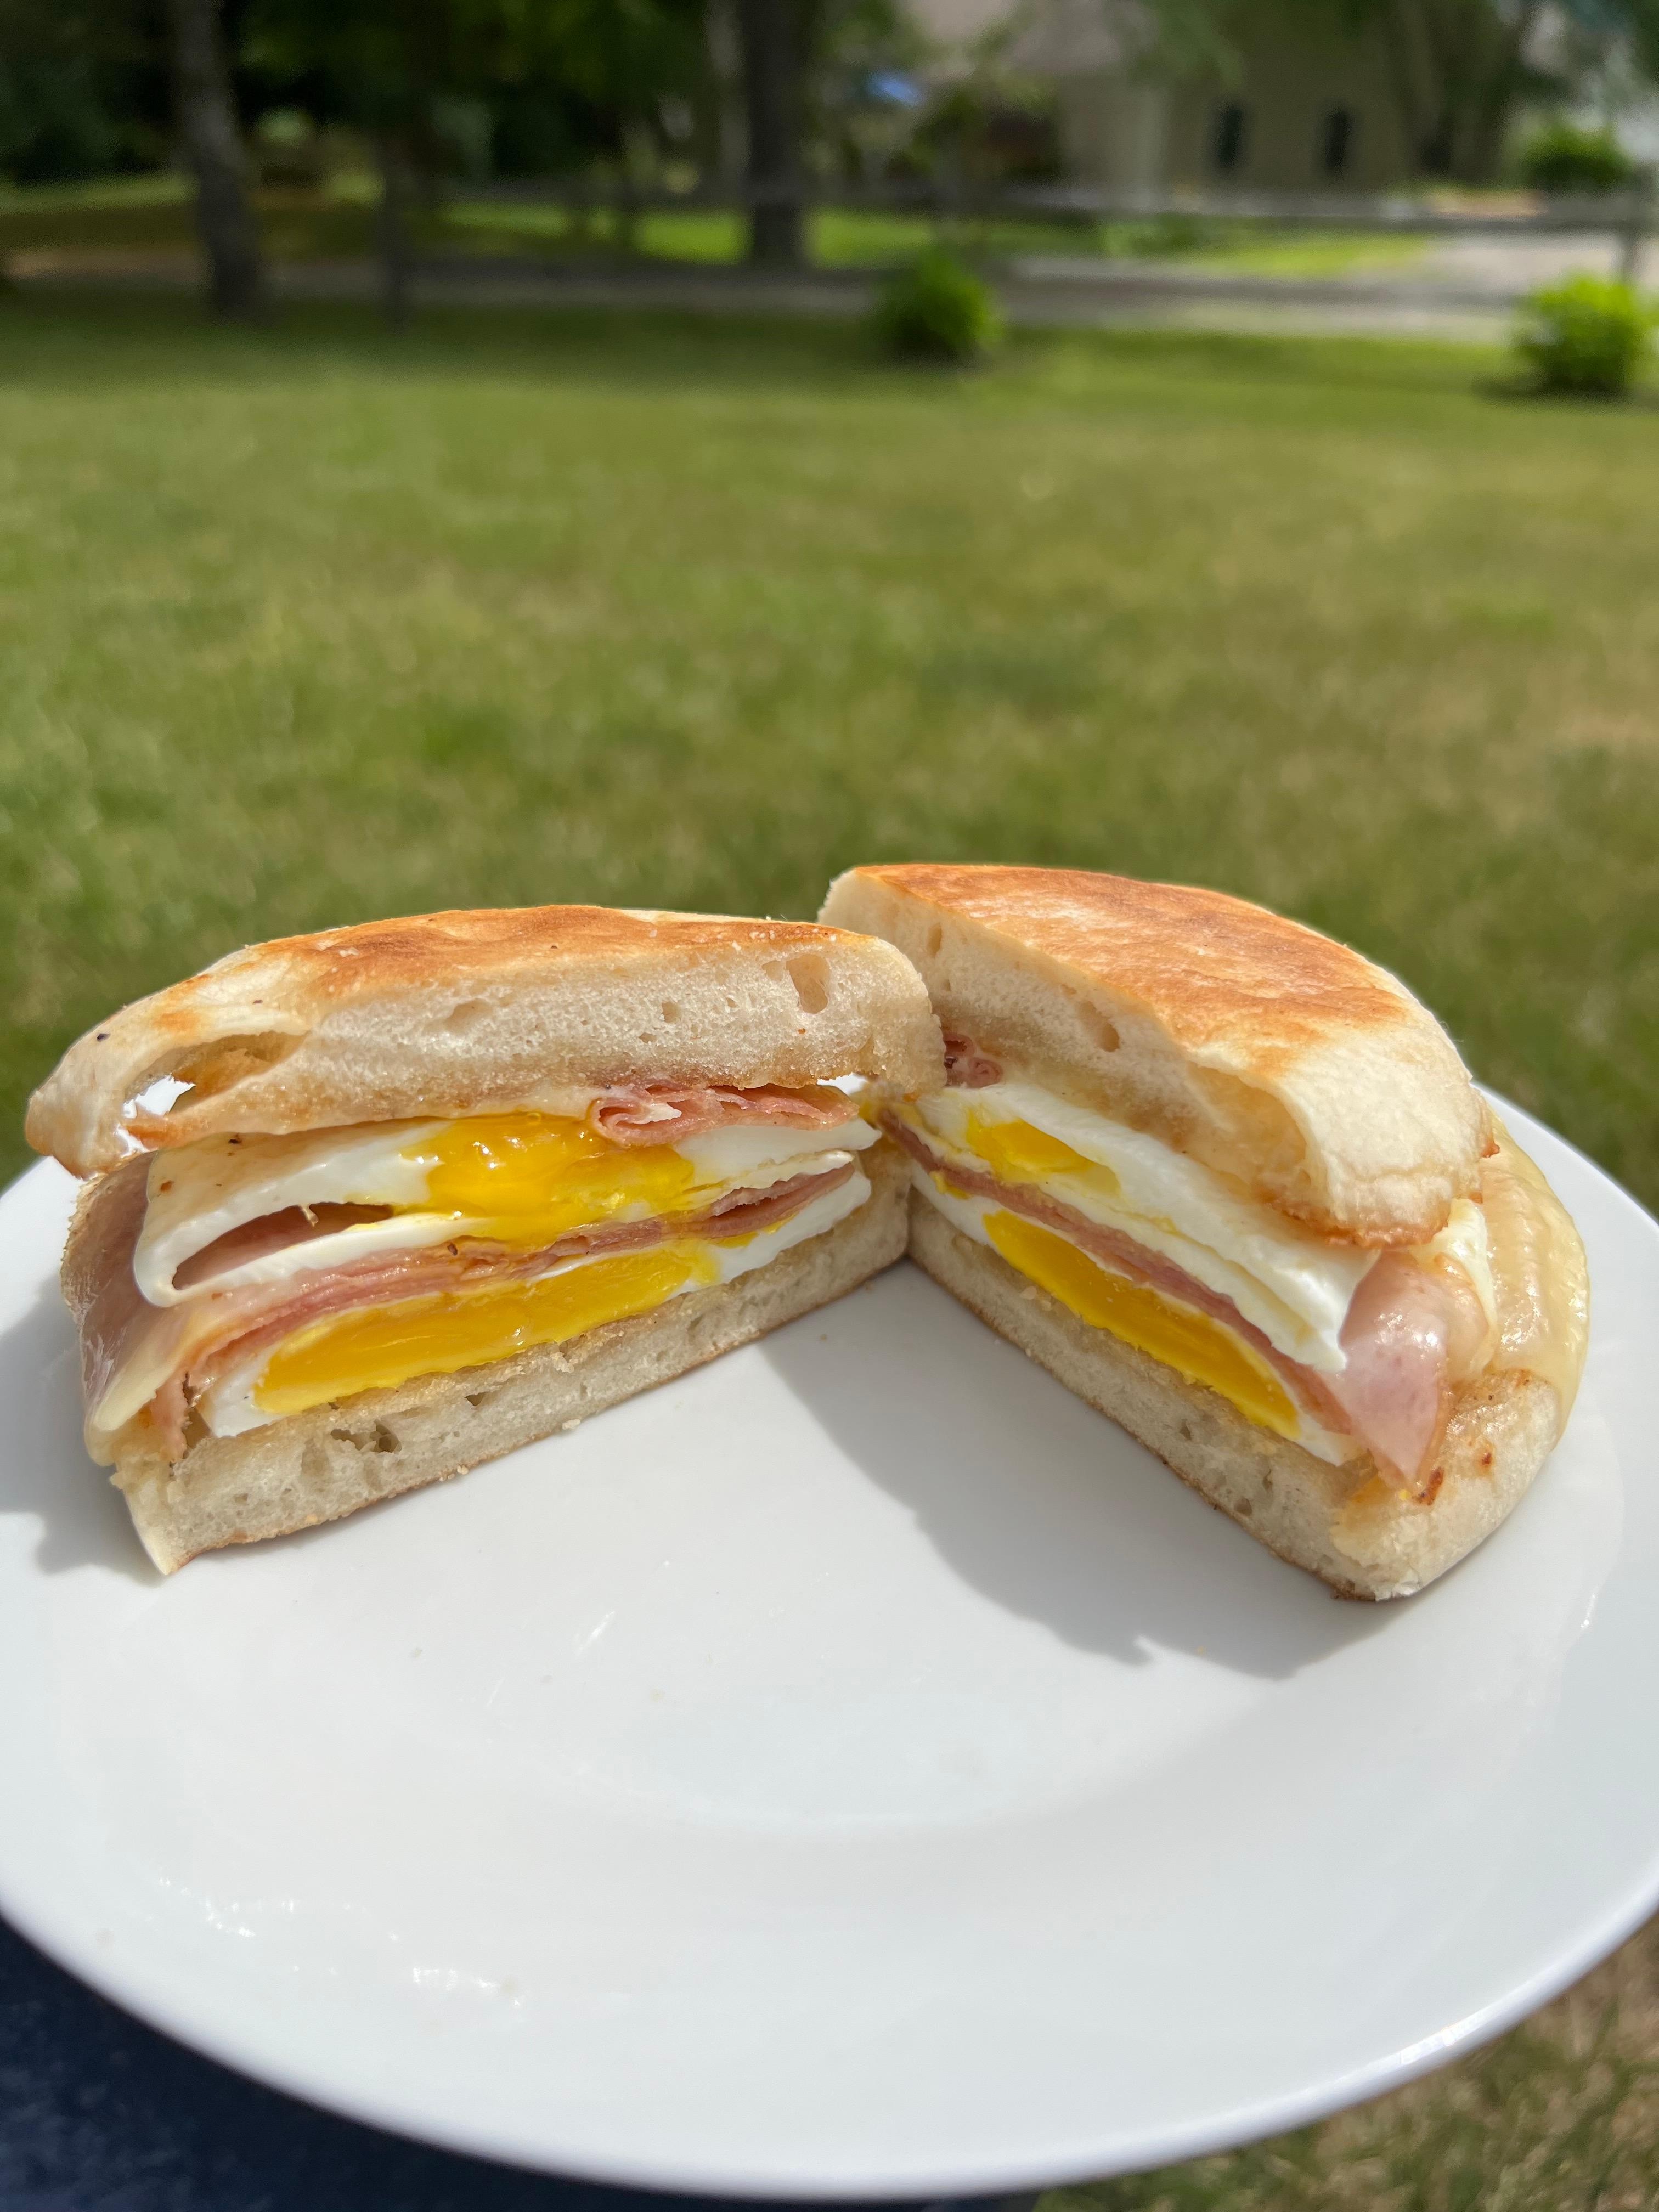 Taylor Ham, Egg, and Cheese